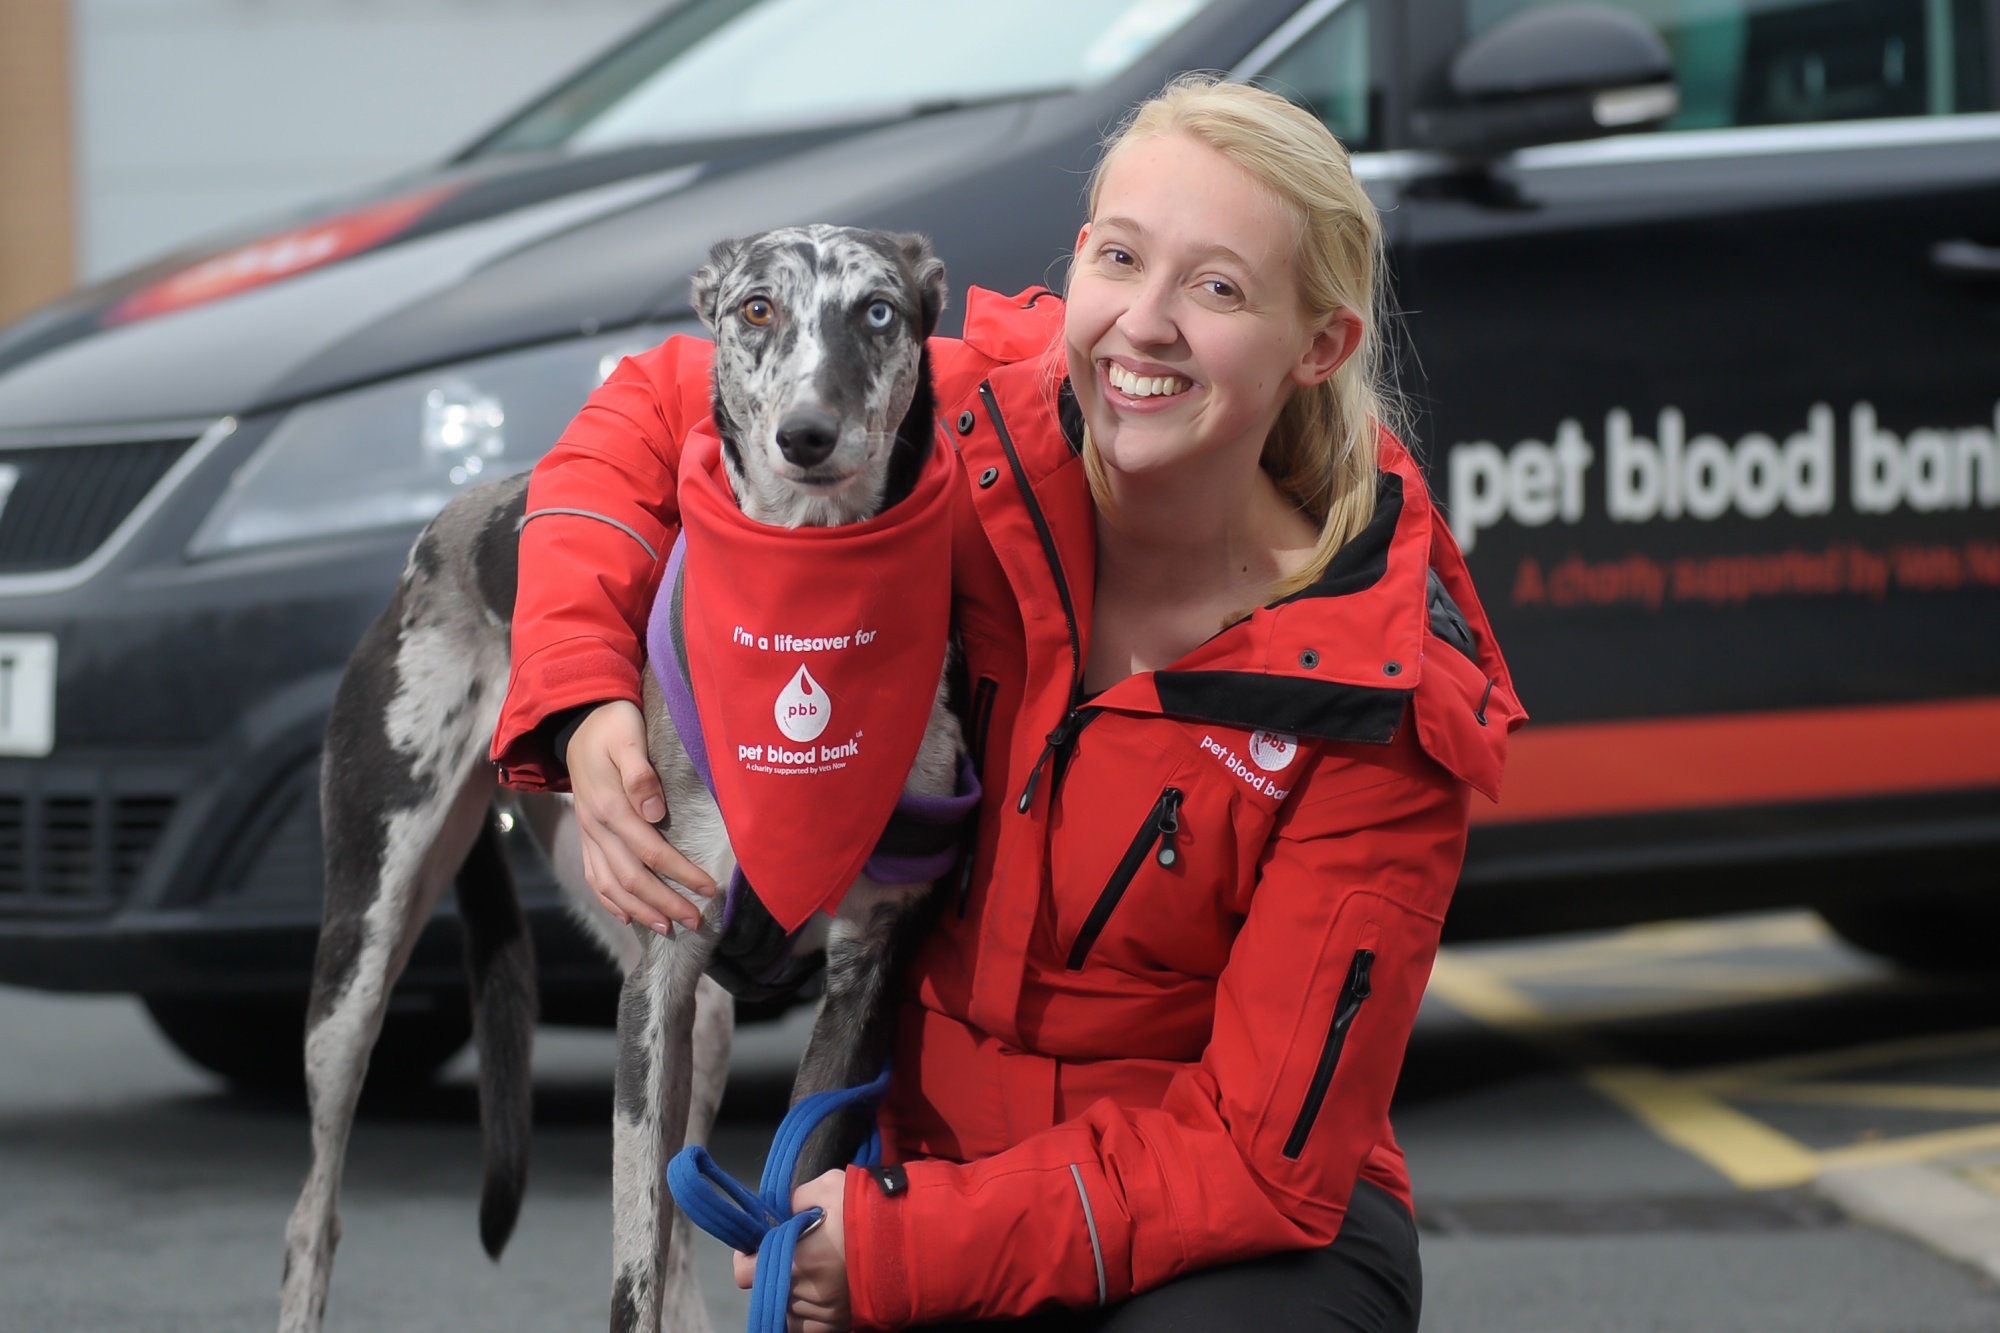 Pet Blood Bank UK | Blood Transfusion Charity For Dogs